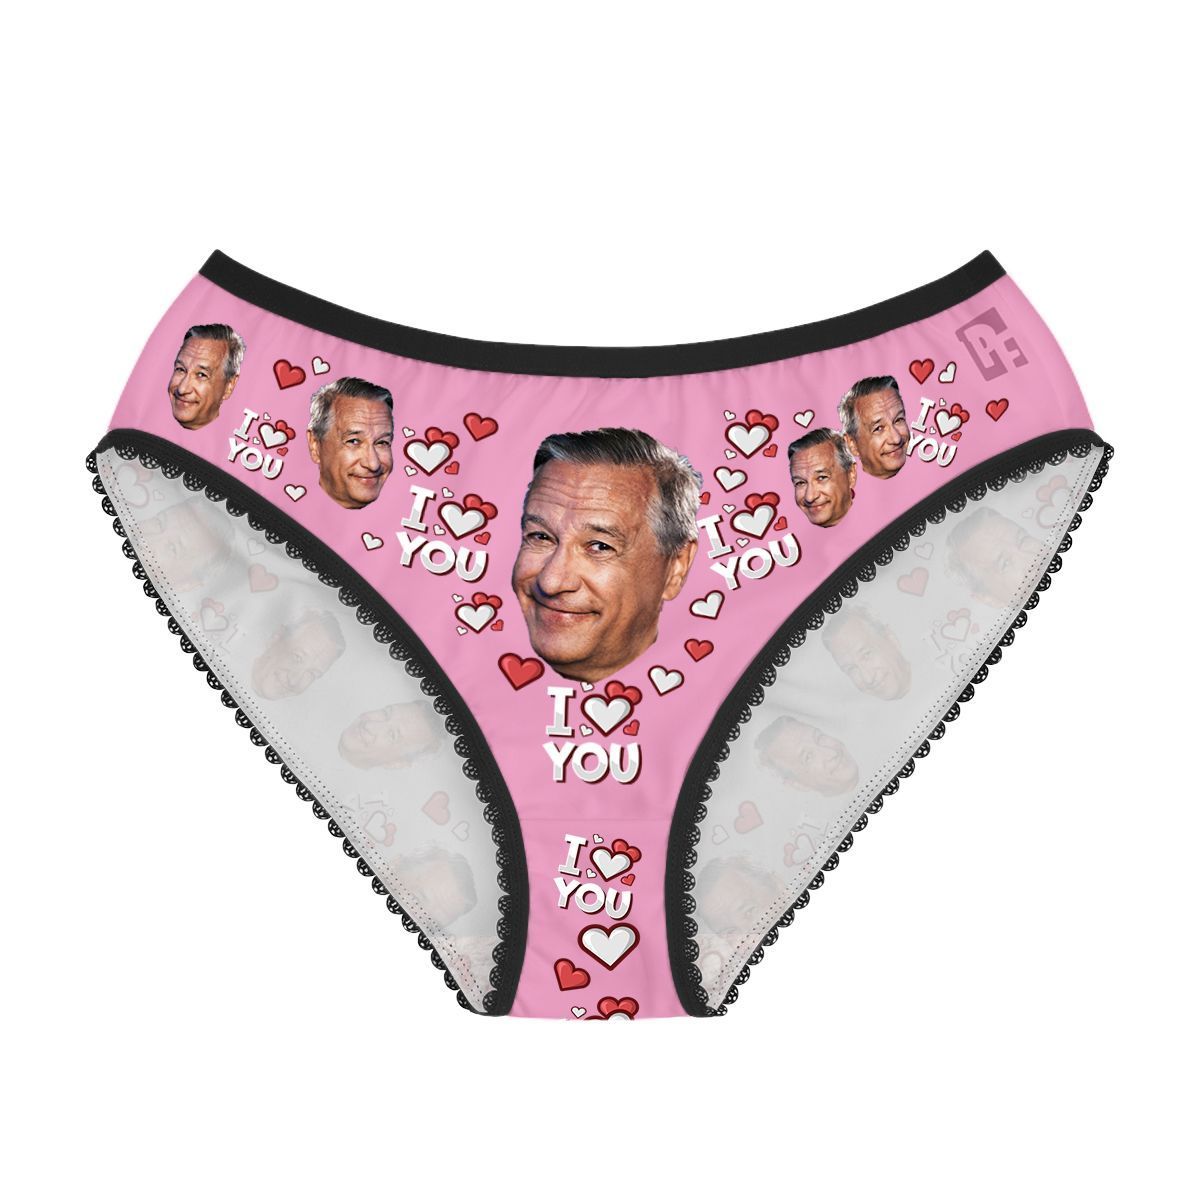 Pink I love you women's underwear briefs personalized with photo printed on them